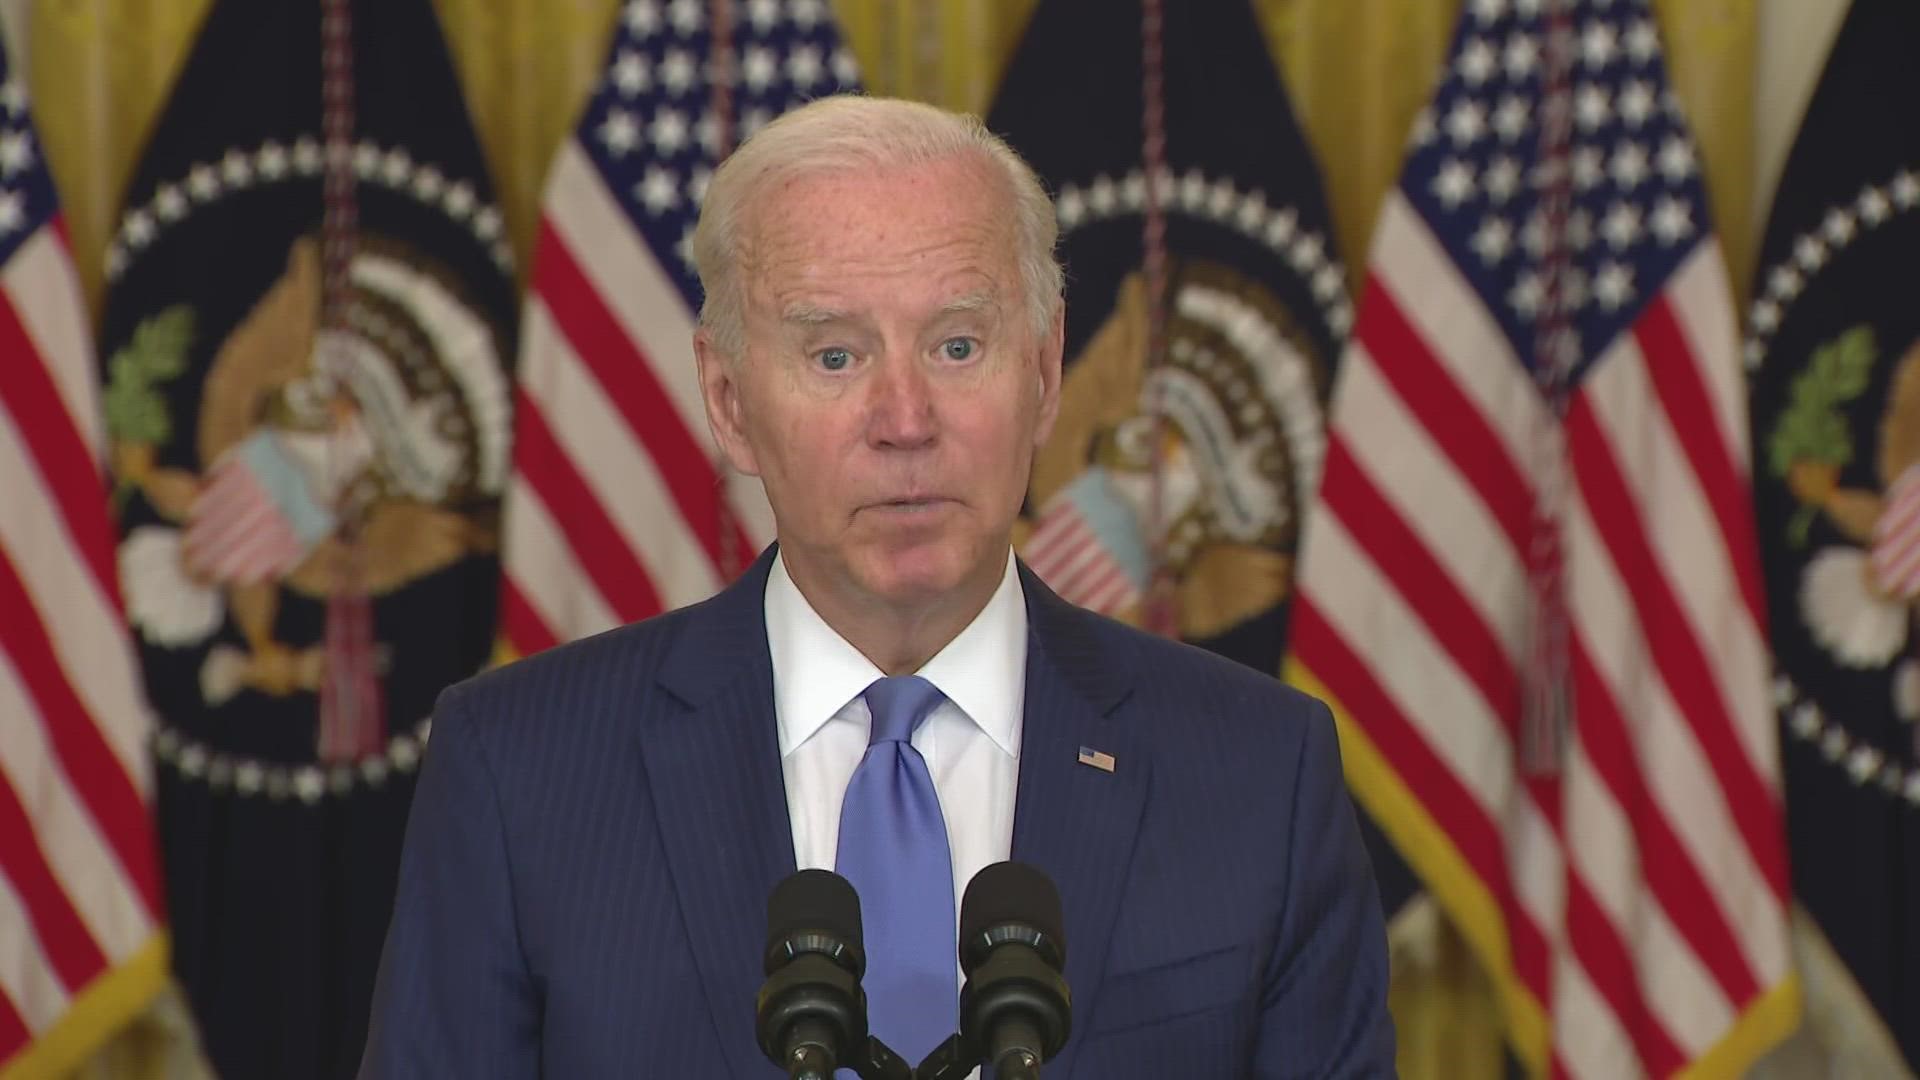 President Joe Biden announced changes to tax policy Thursday that he believes will help the middle class.